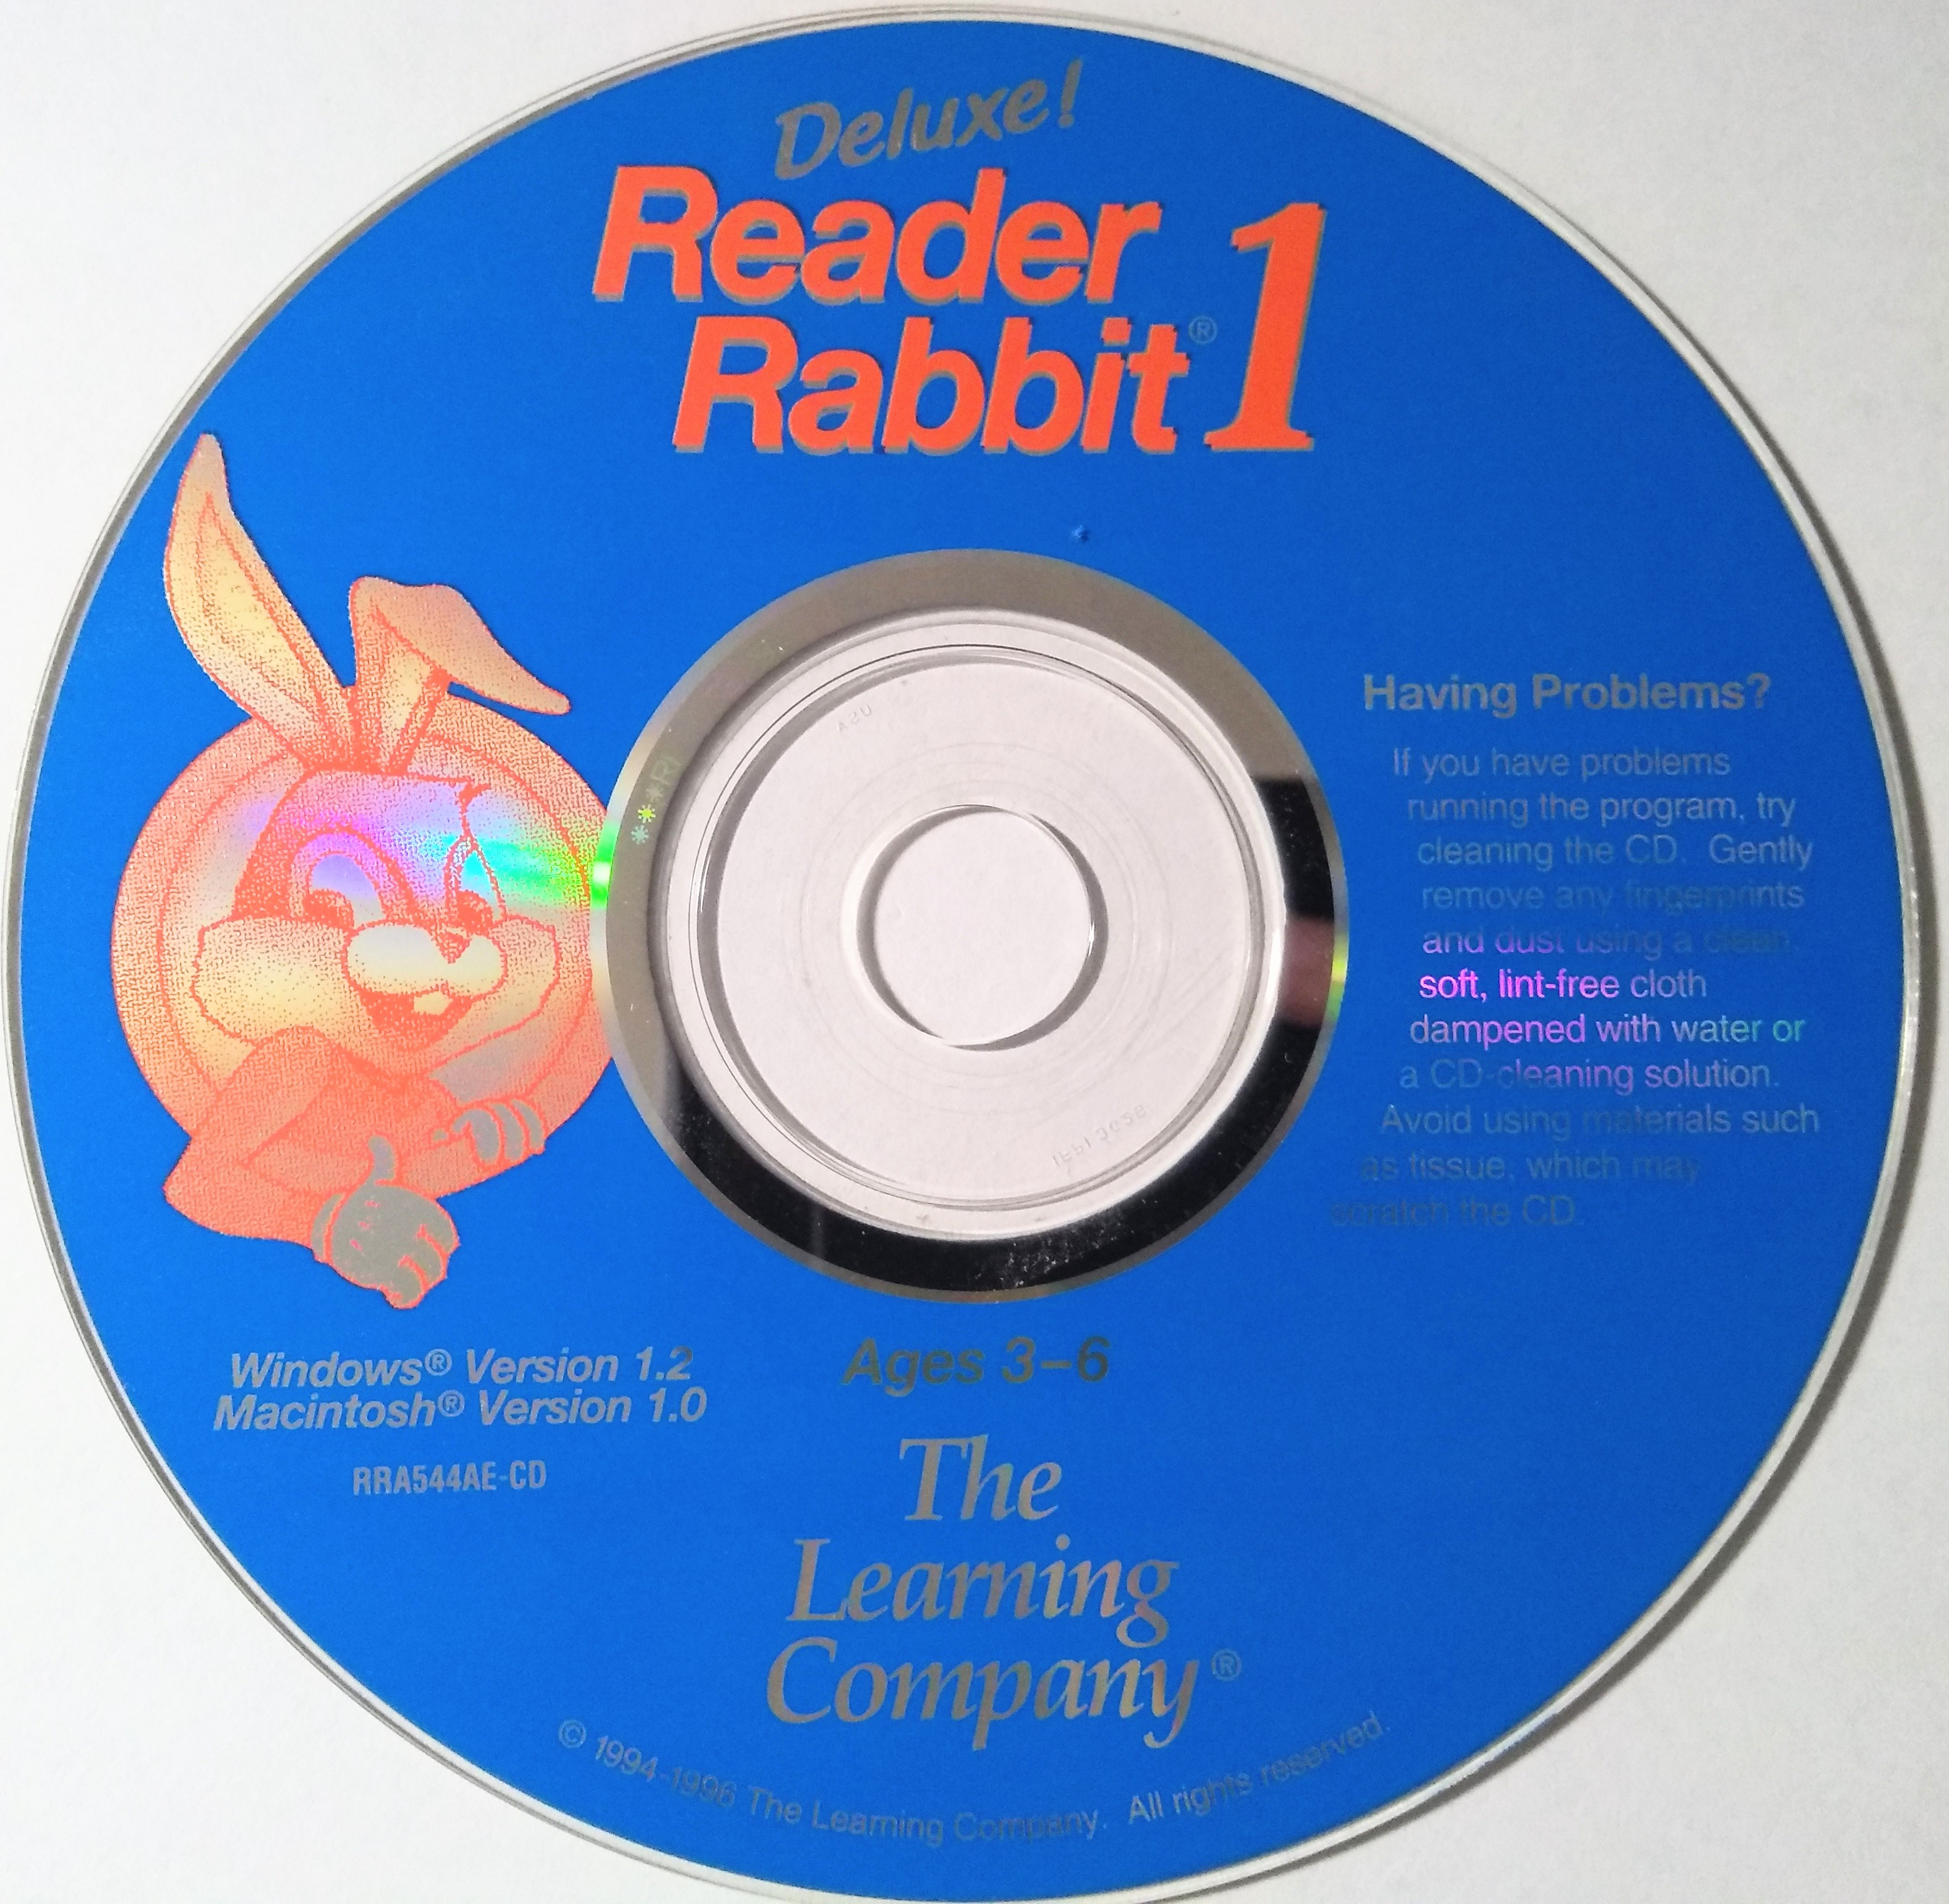 Reader Rabbit 3 Windows 1.1 Macintosh 1.01 CD-ROM The Learning Company Deluxe